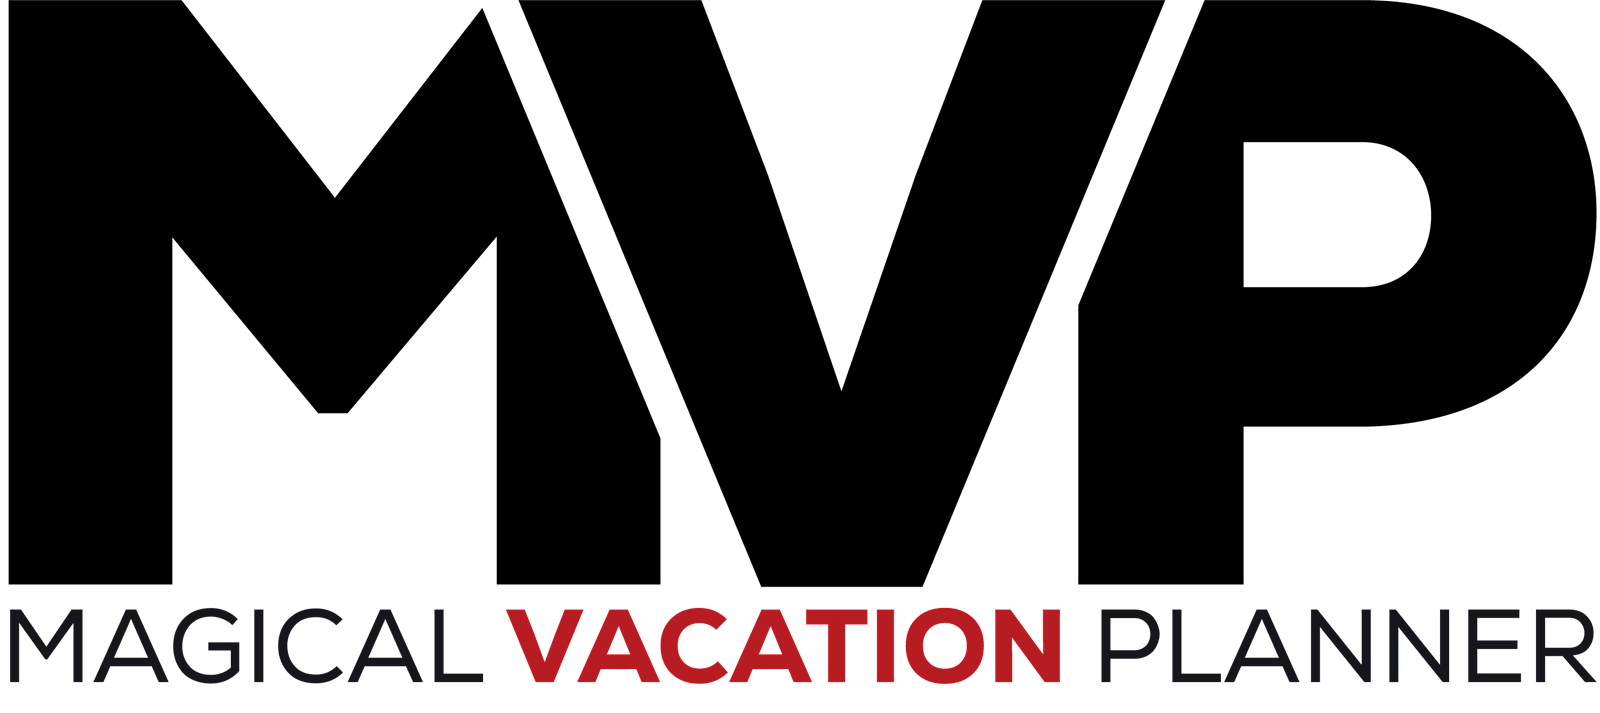 magical vacation planner